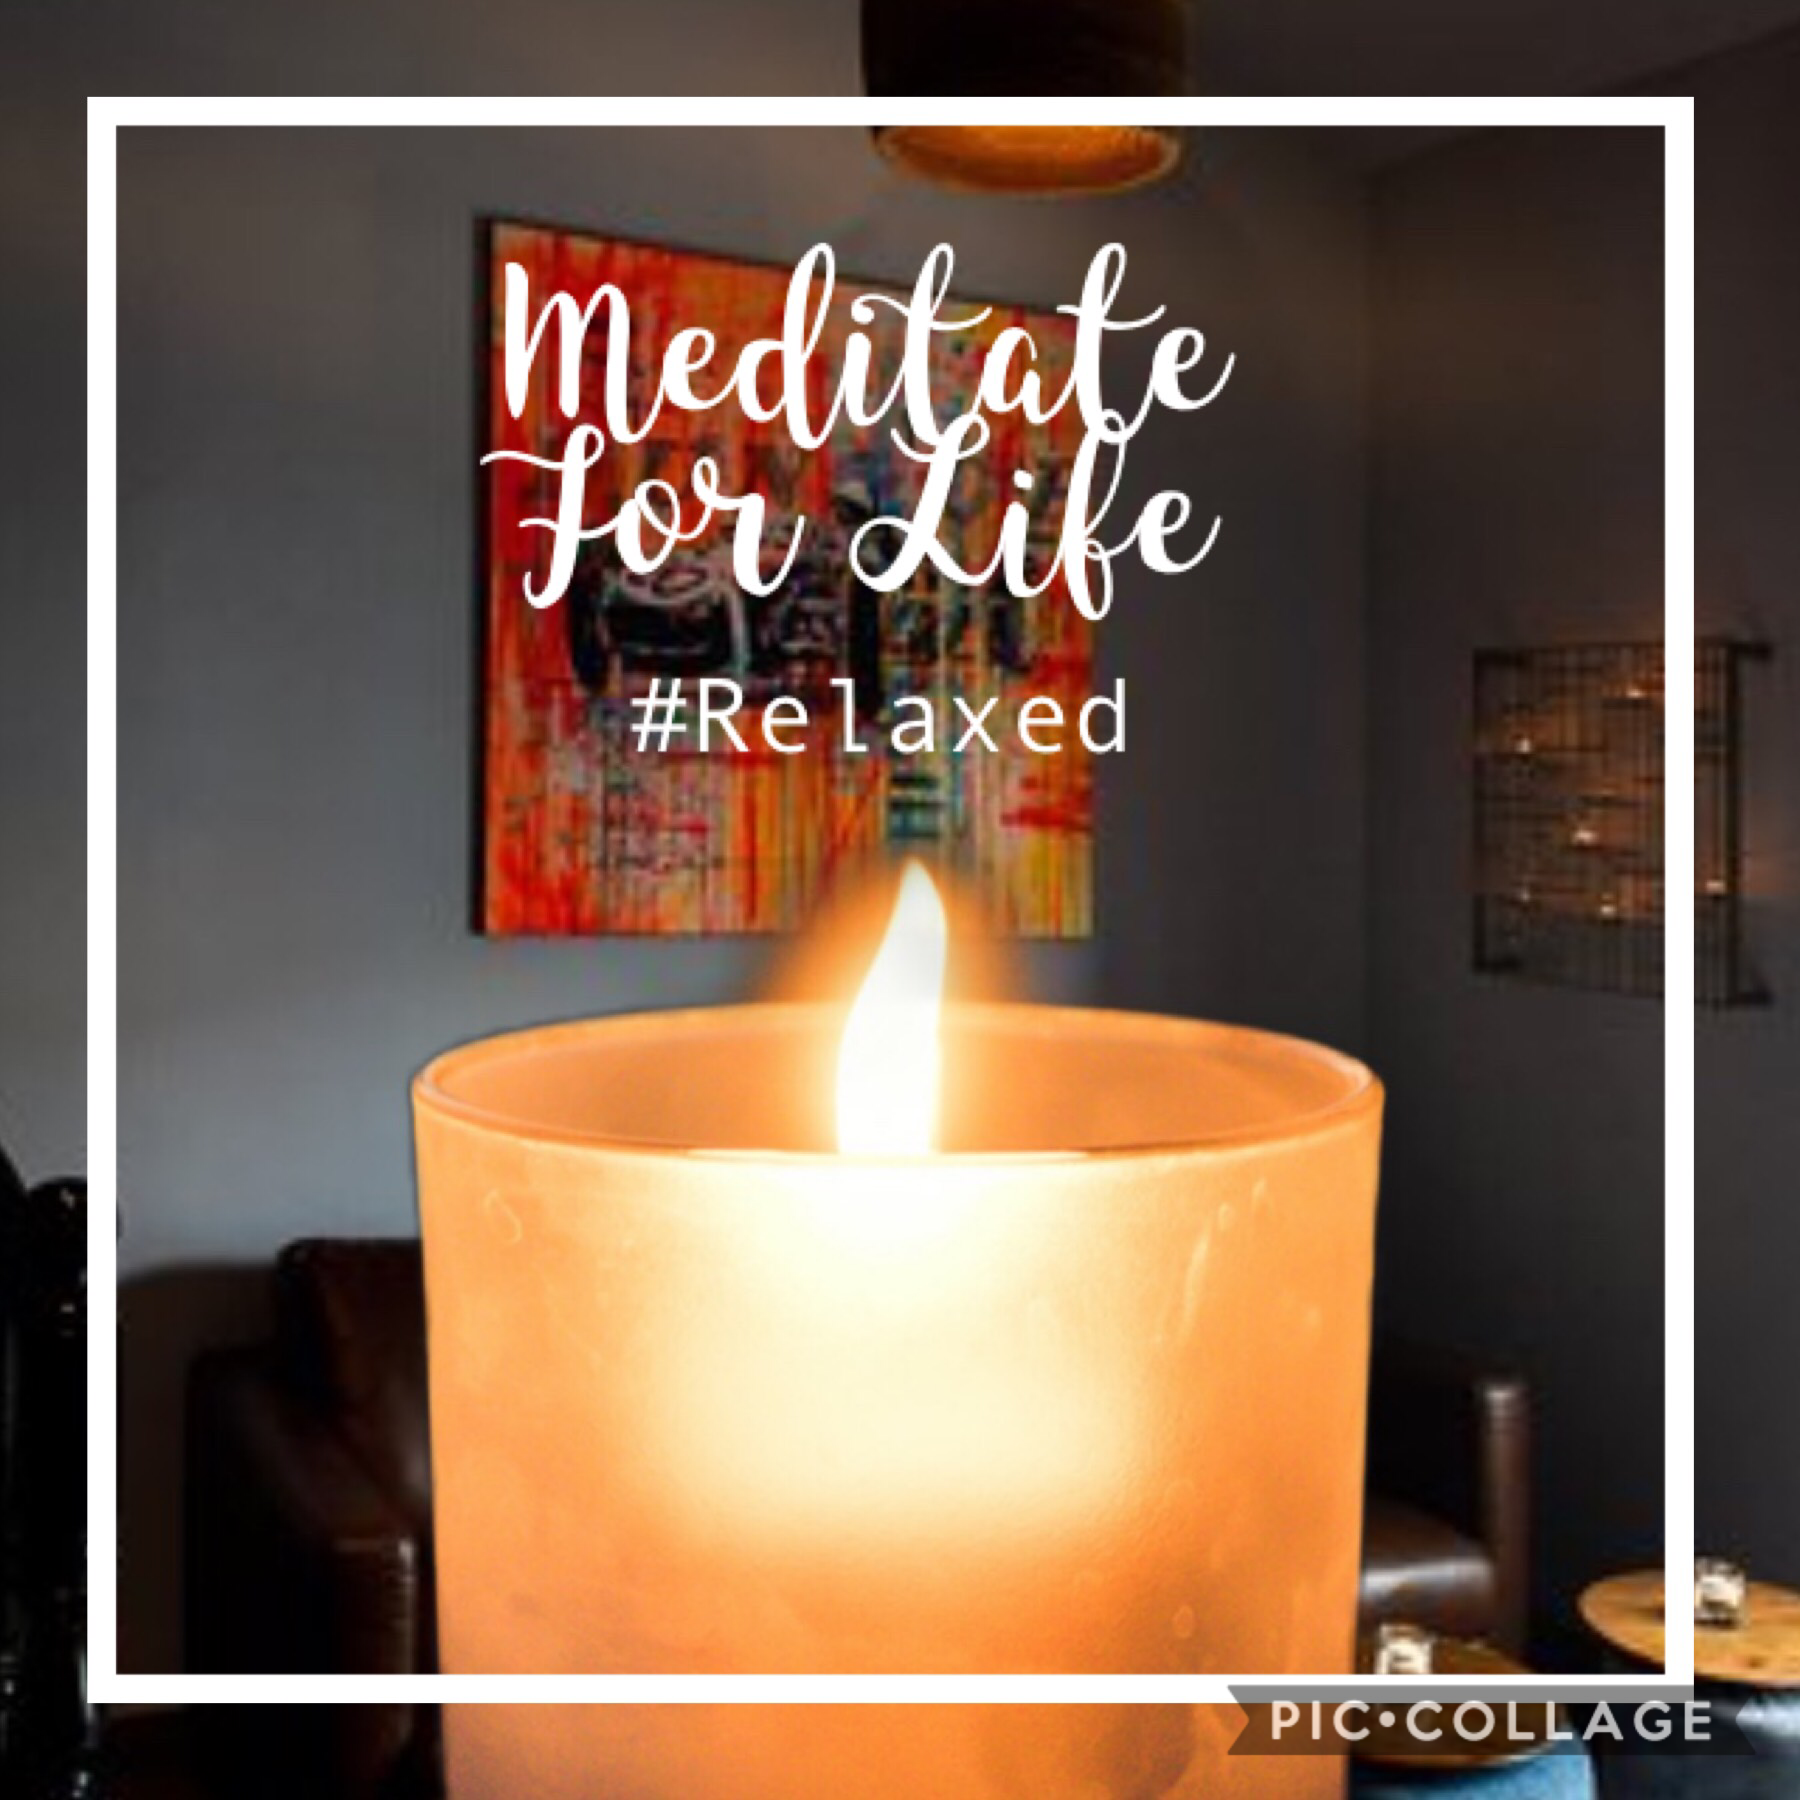 #Relaxed #Meditate #Candle 🕯